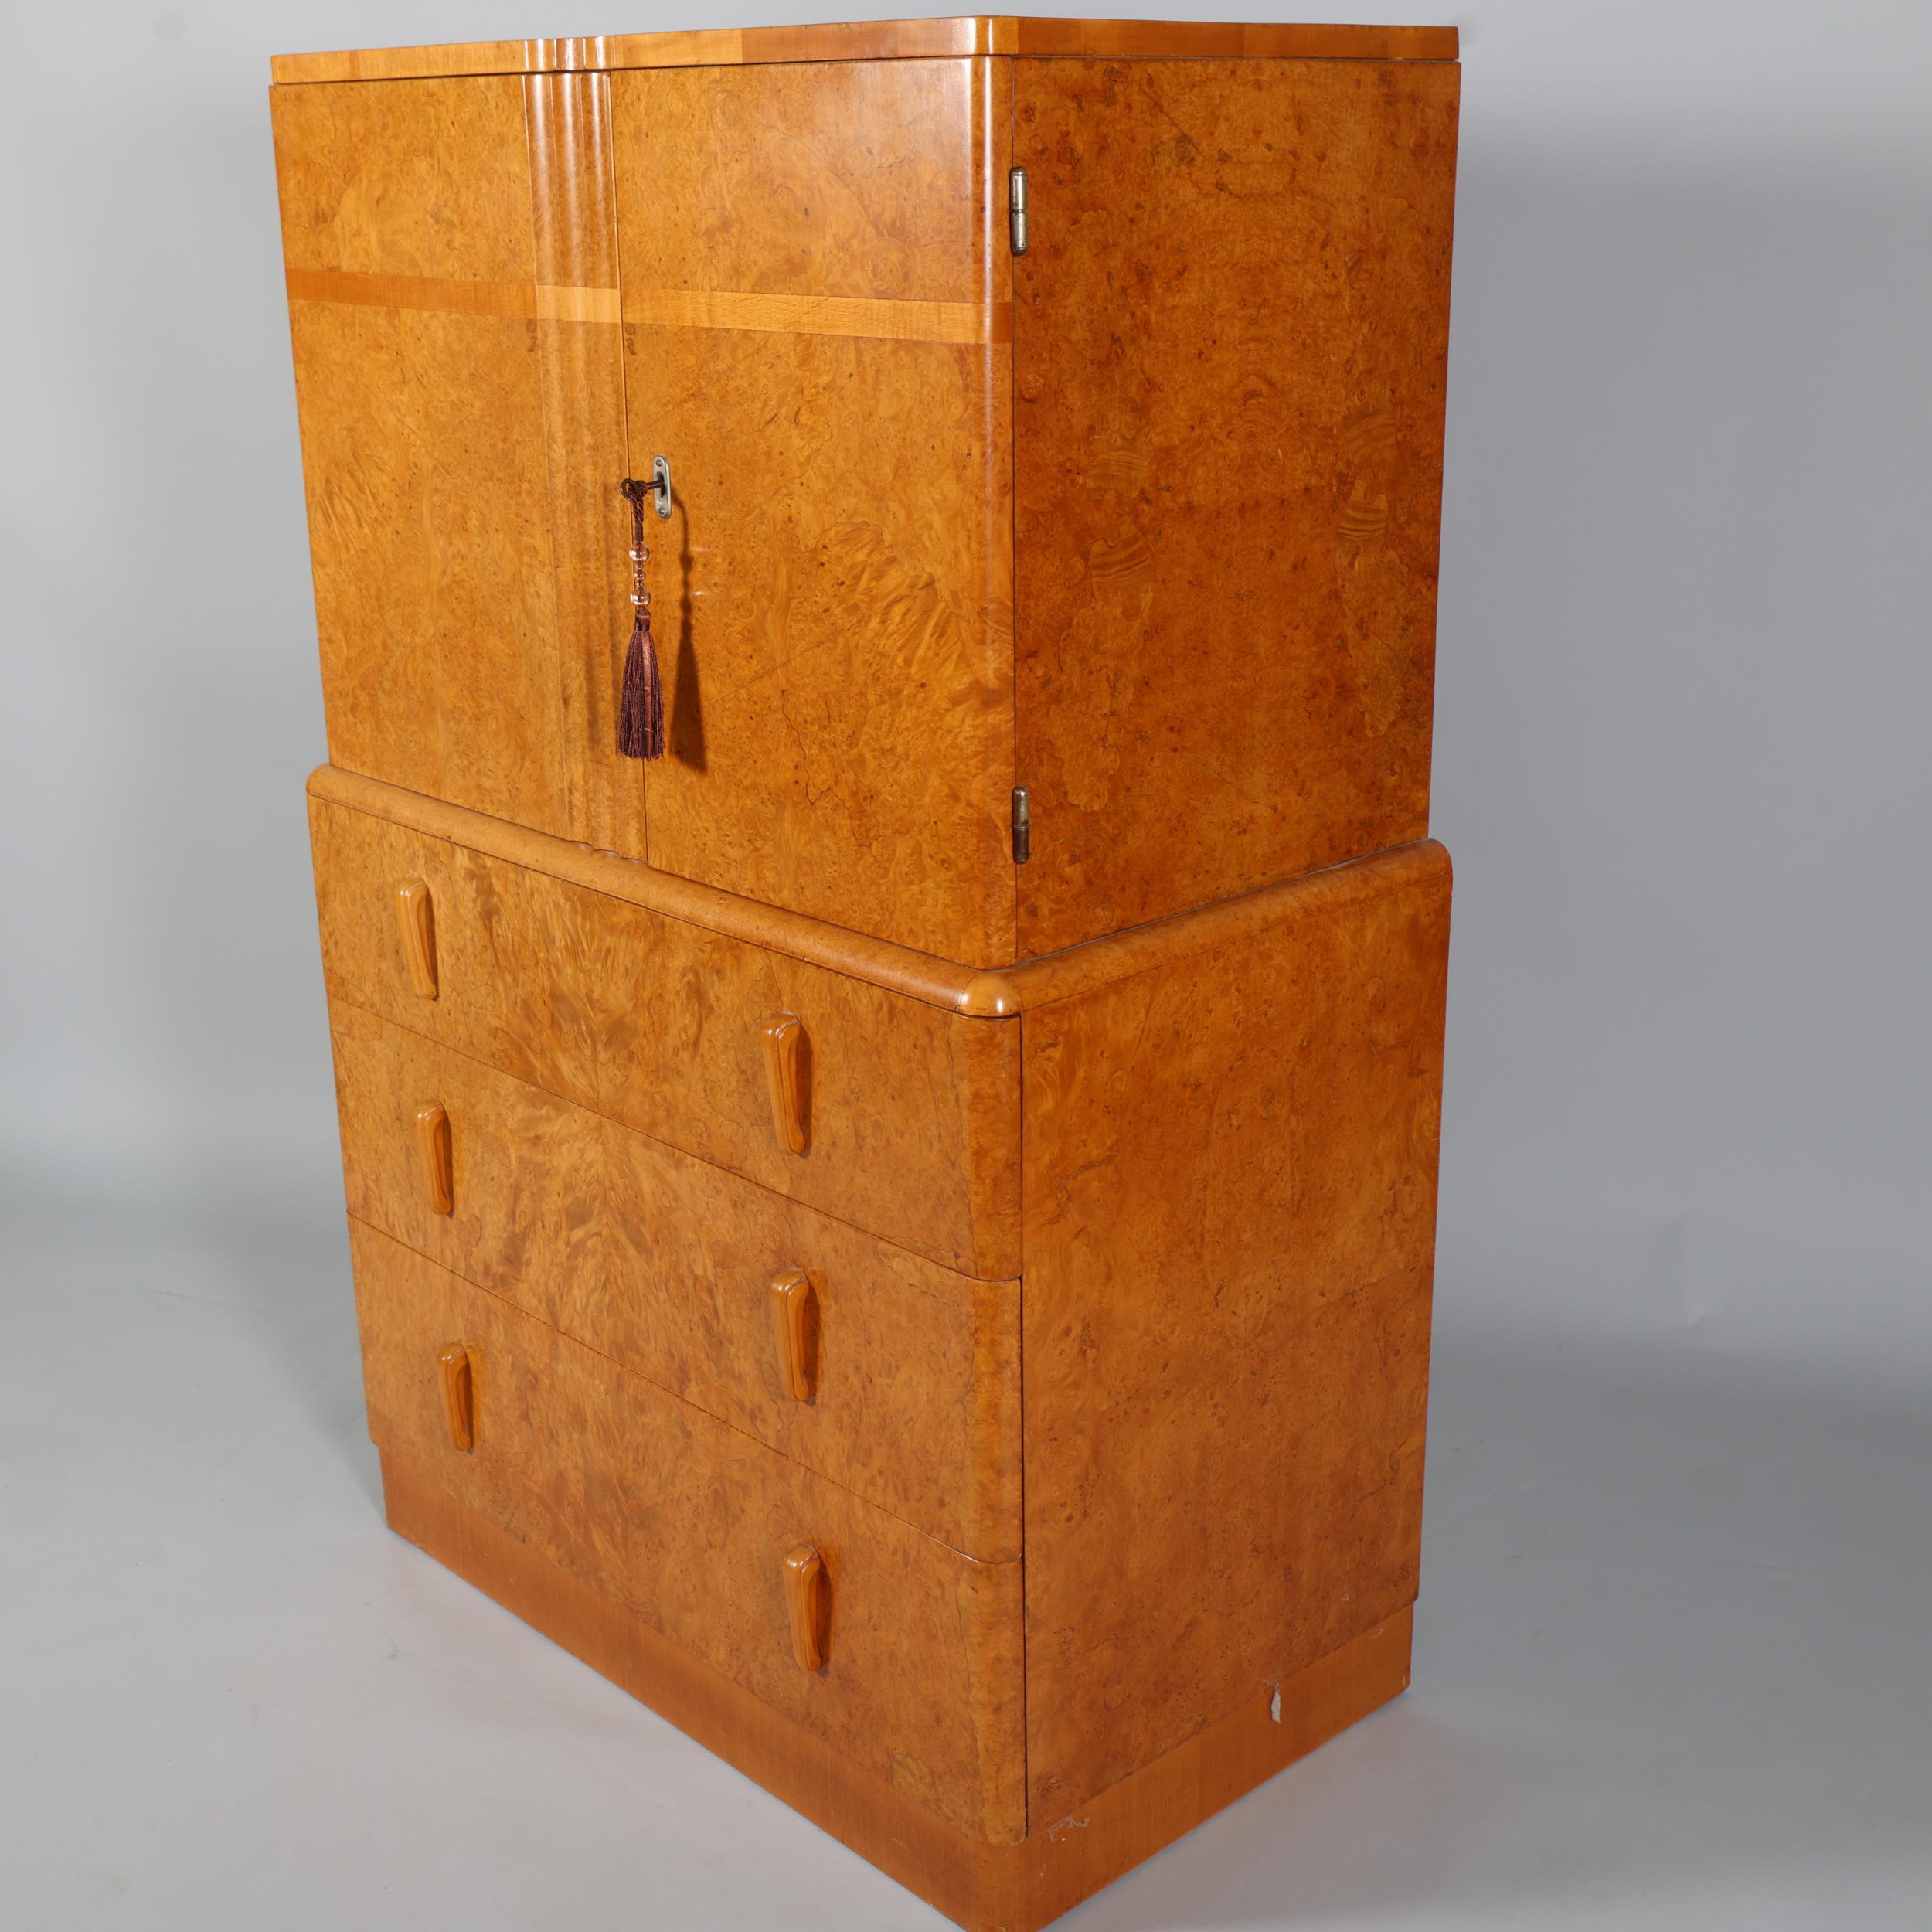 Art Deco birdseye maple tallboy, 2 doors above enclosing shelved interior with 3 long drawers - Image 3 of 5